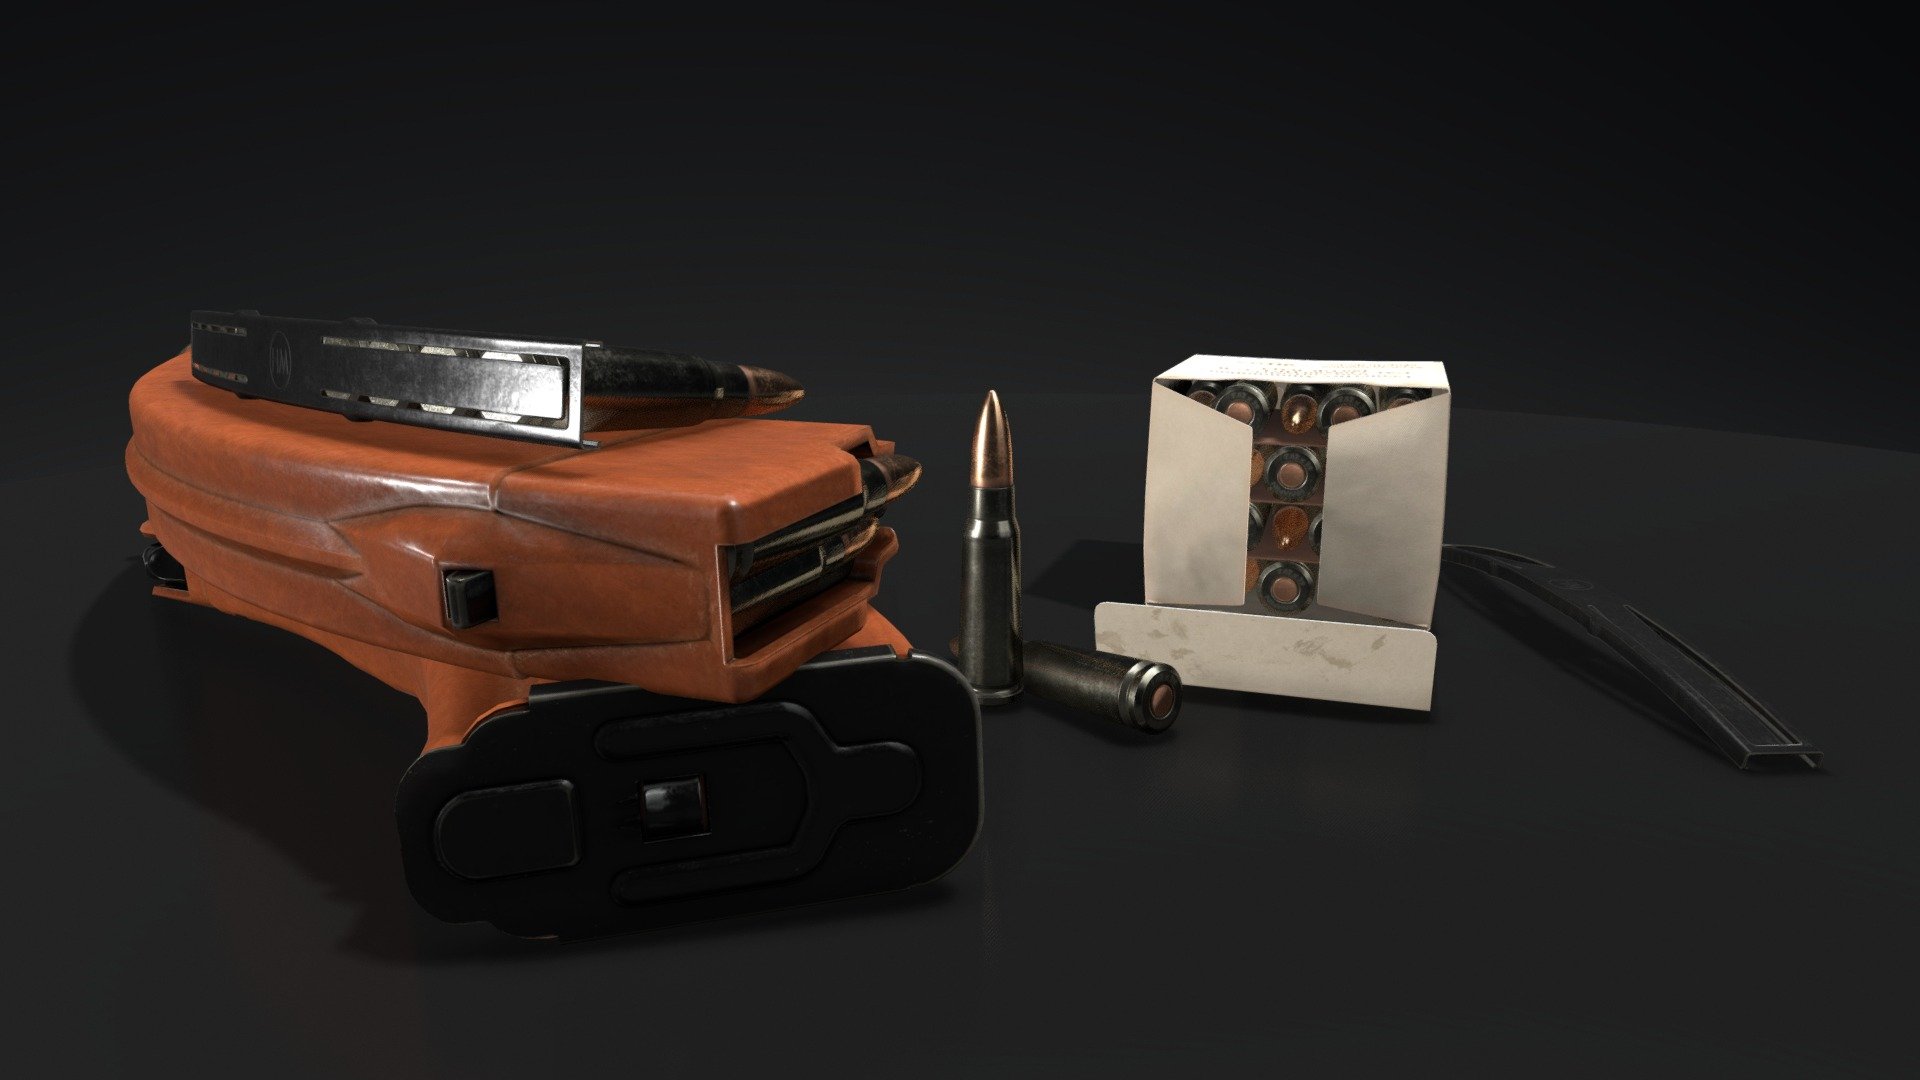 A small collection of hard surface props for the 7.62x39mm ammo and related accesories, like a stripper clip, ammo box and a bakelite magazine 3d model